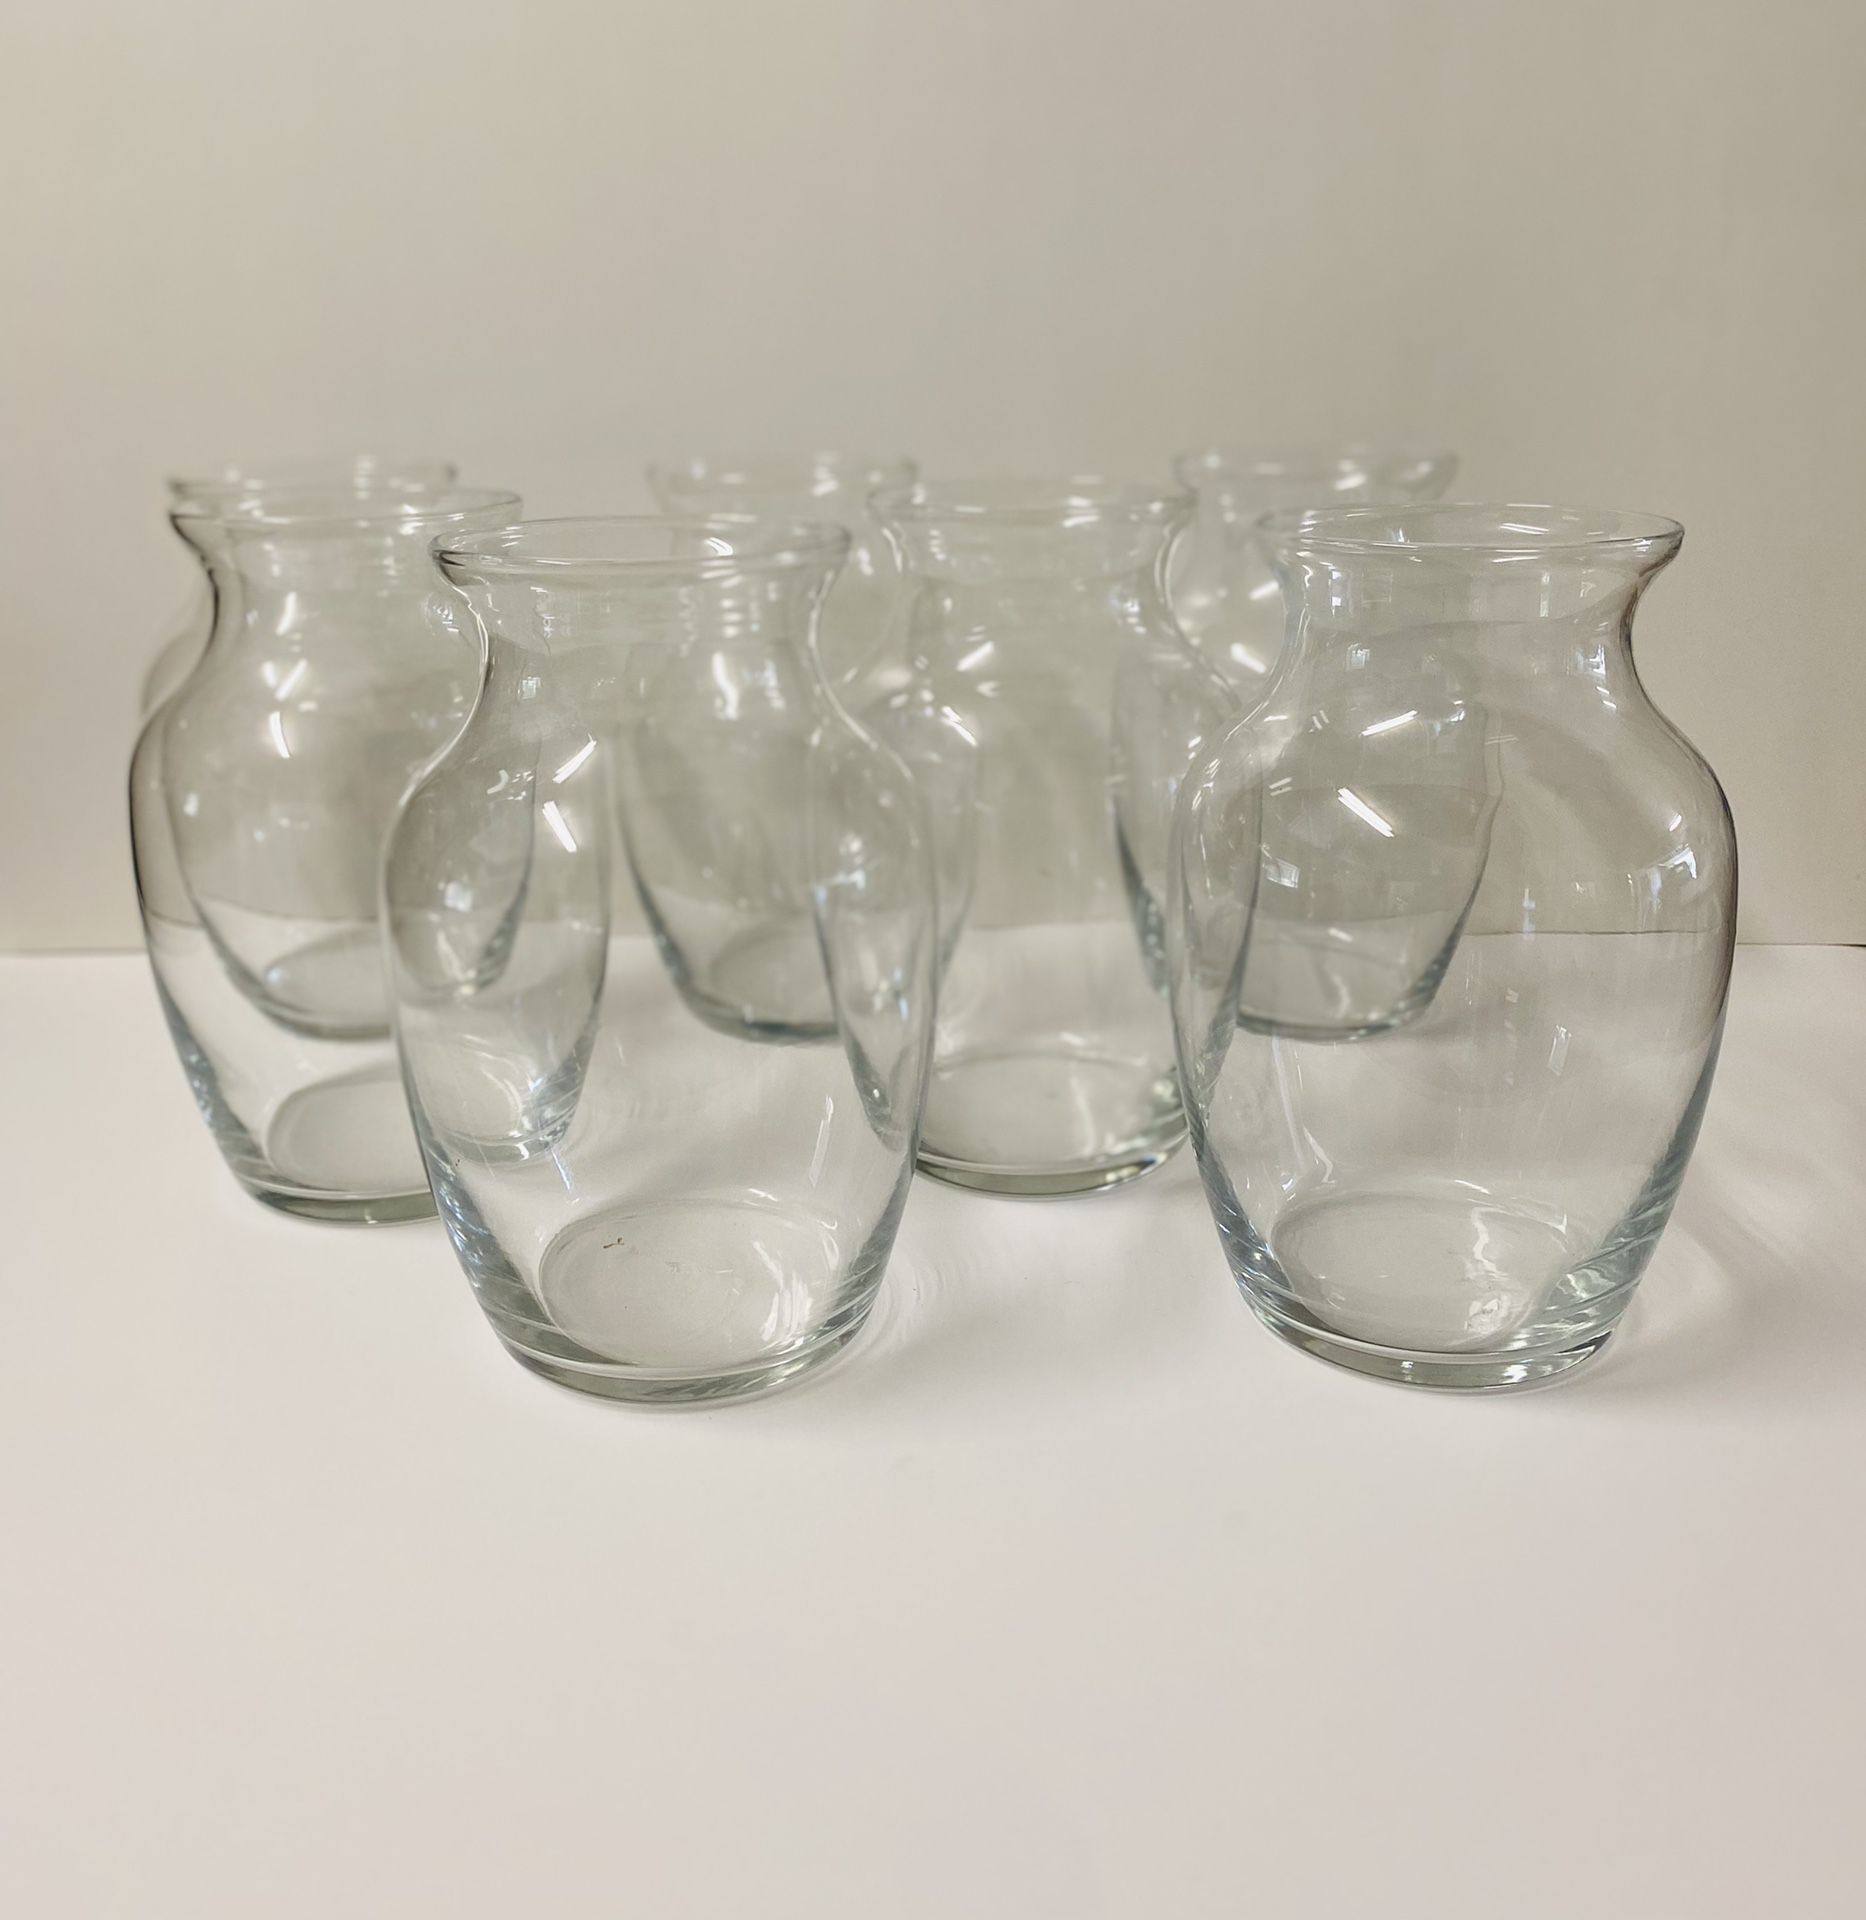 7 Glass Centerpiece Vases With Flowers